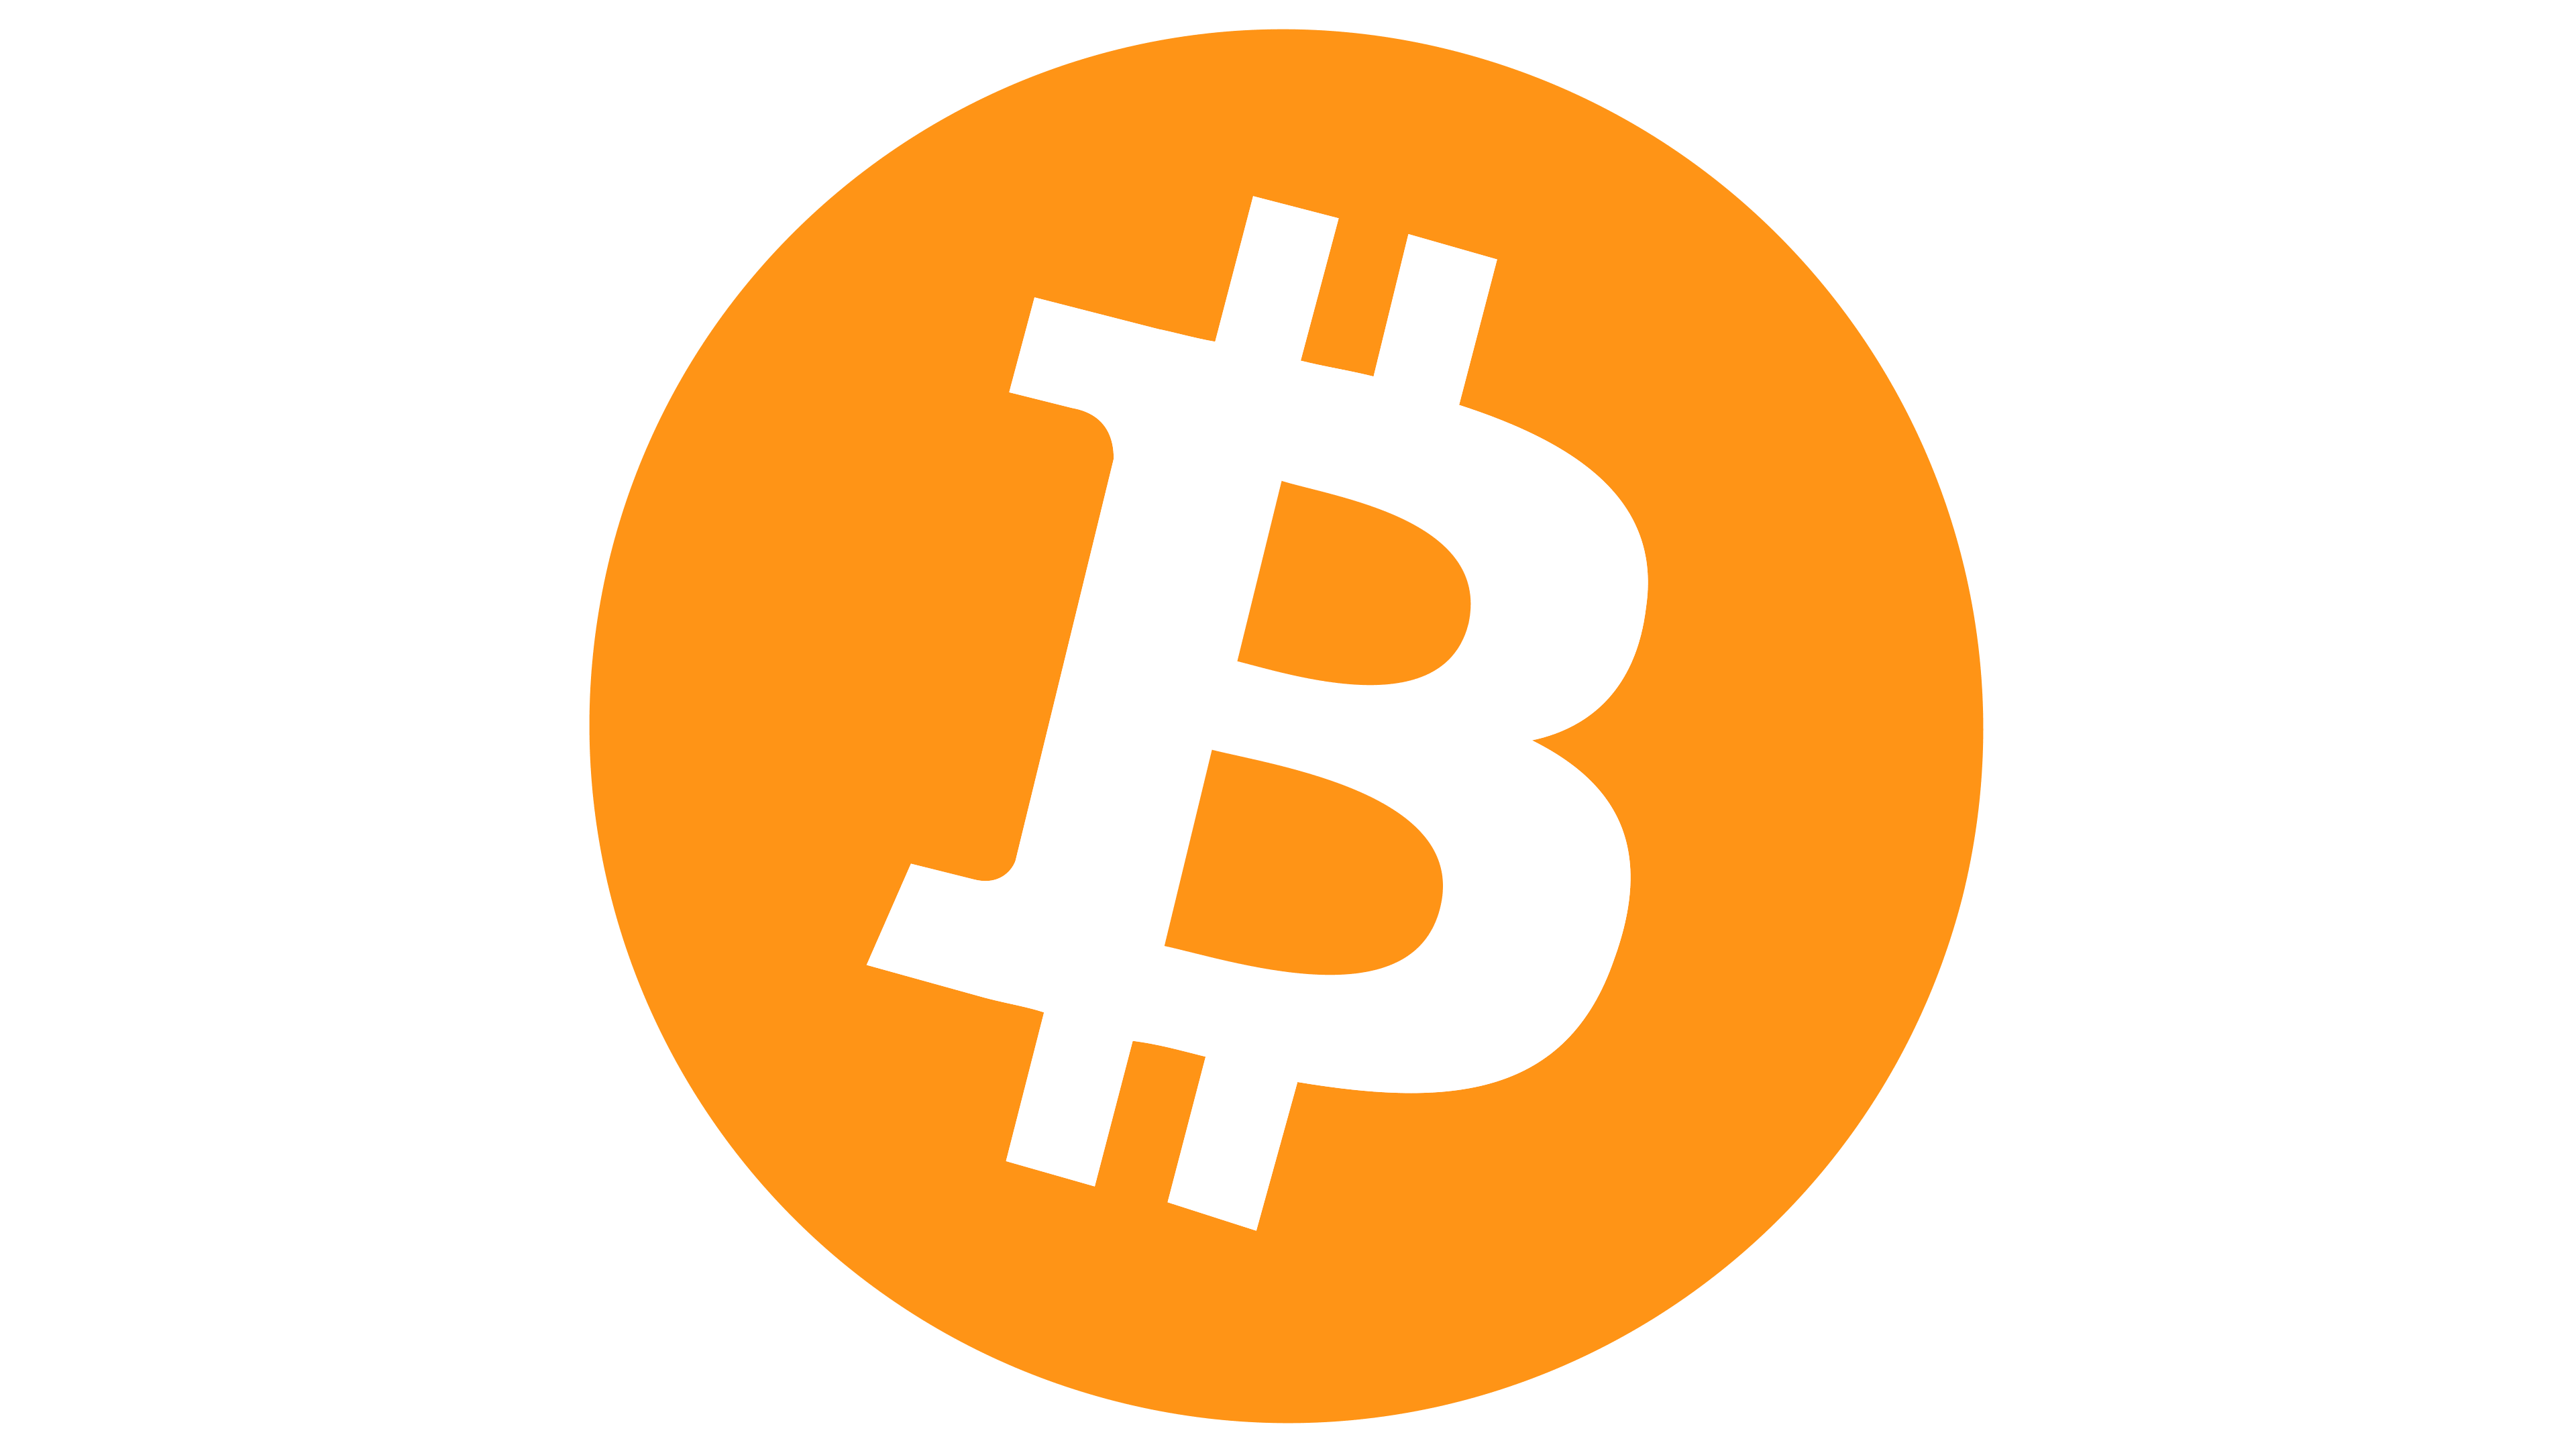 bitcoins or bitcoins for free